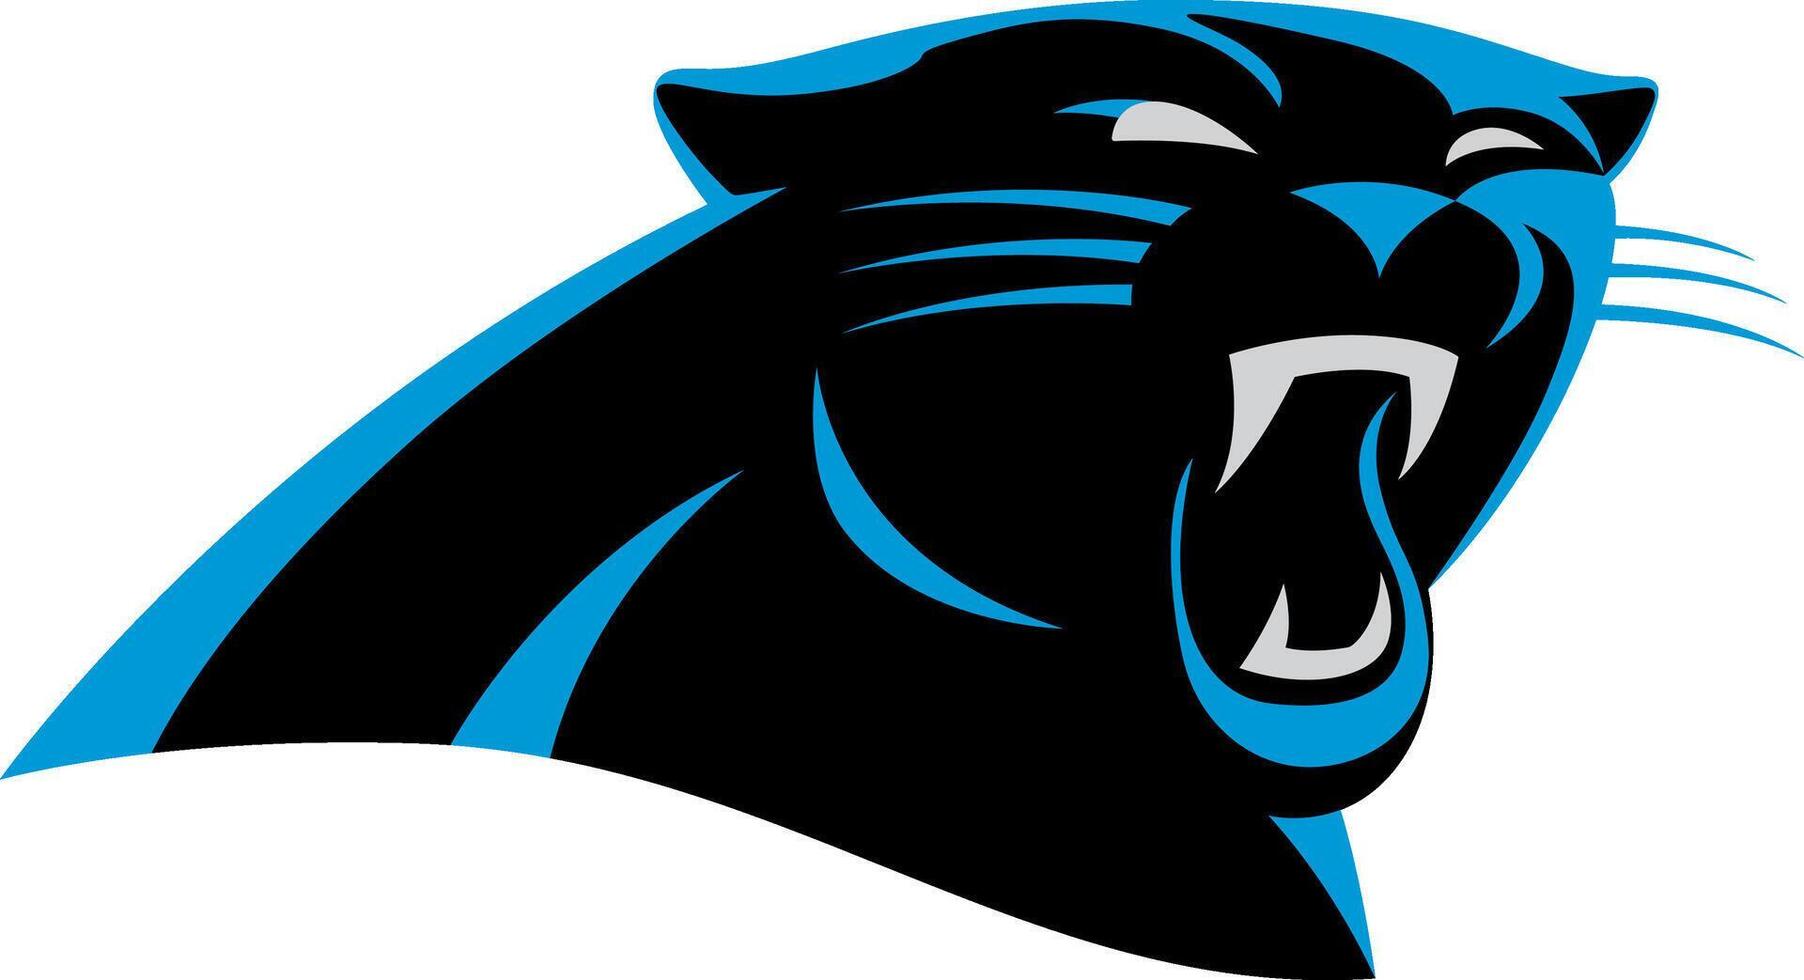 The logo of the Carolina Panthers American football team of the National Football League vector